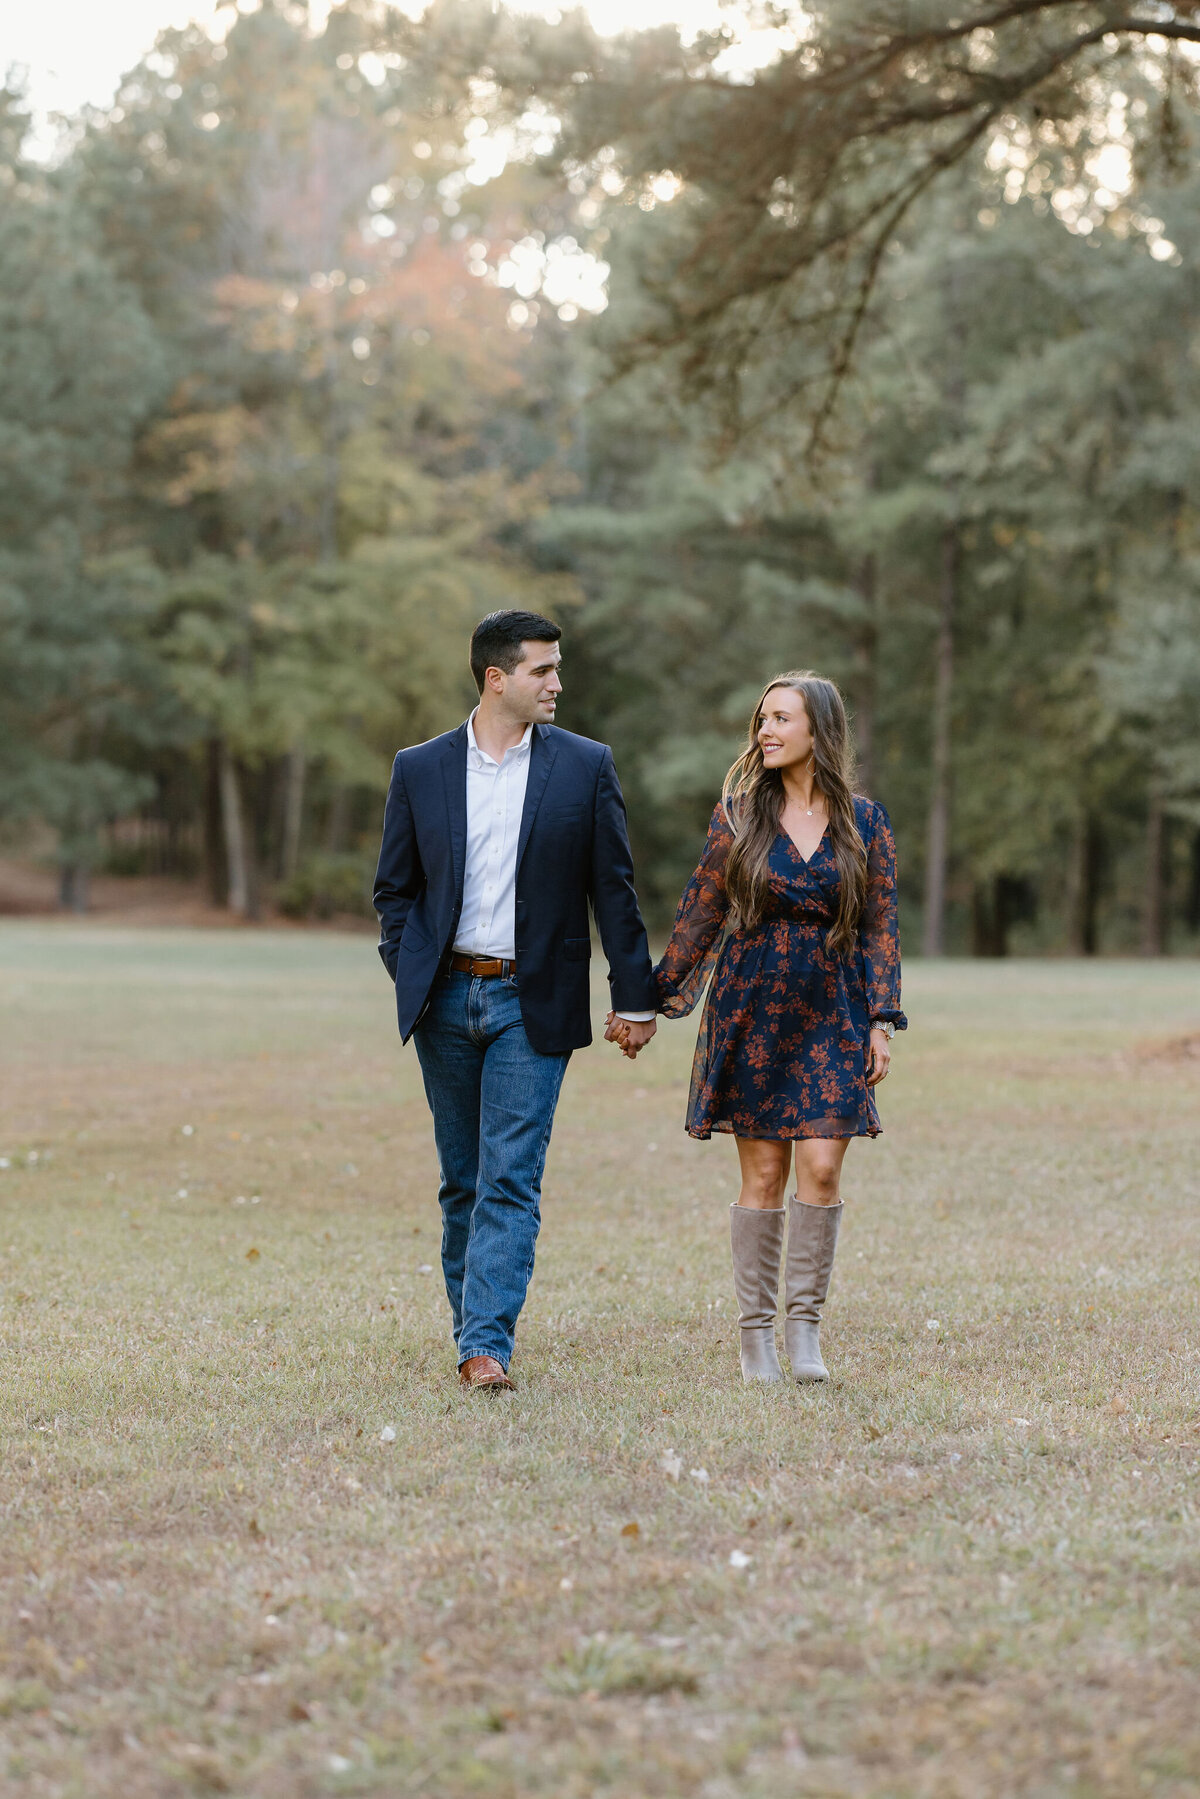 Longview, TX couple holding hands and walking through open field